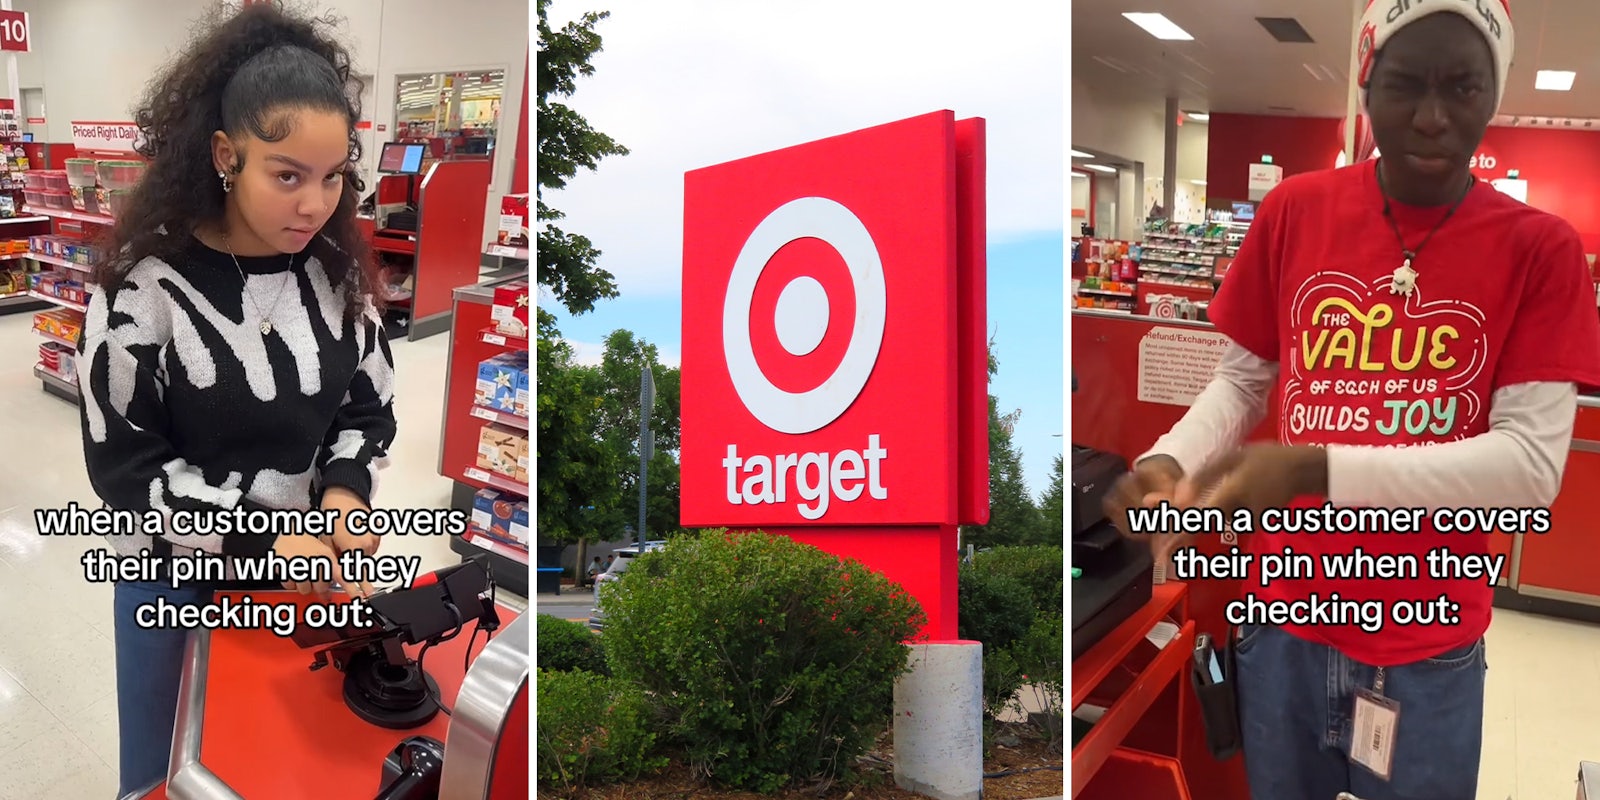 Target worker mocks customers who cover pin number when checking out